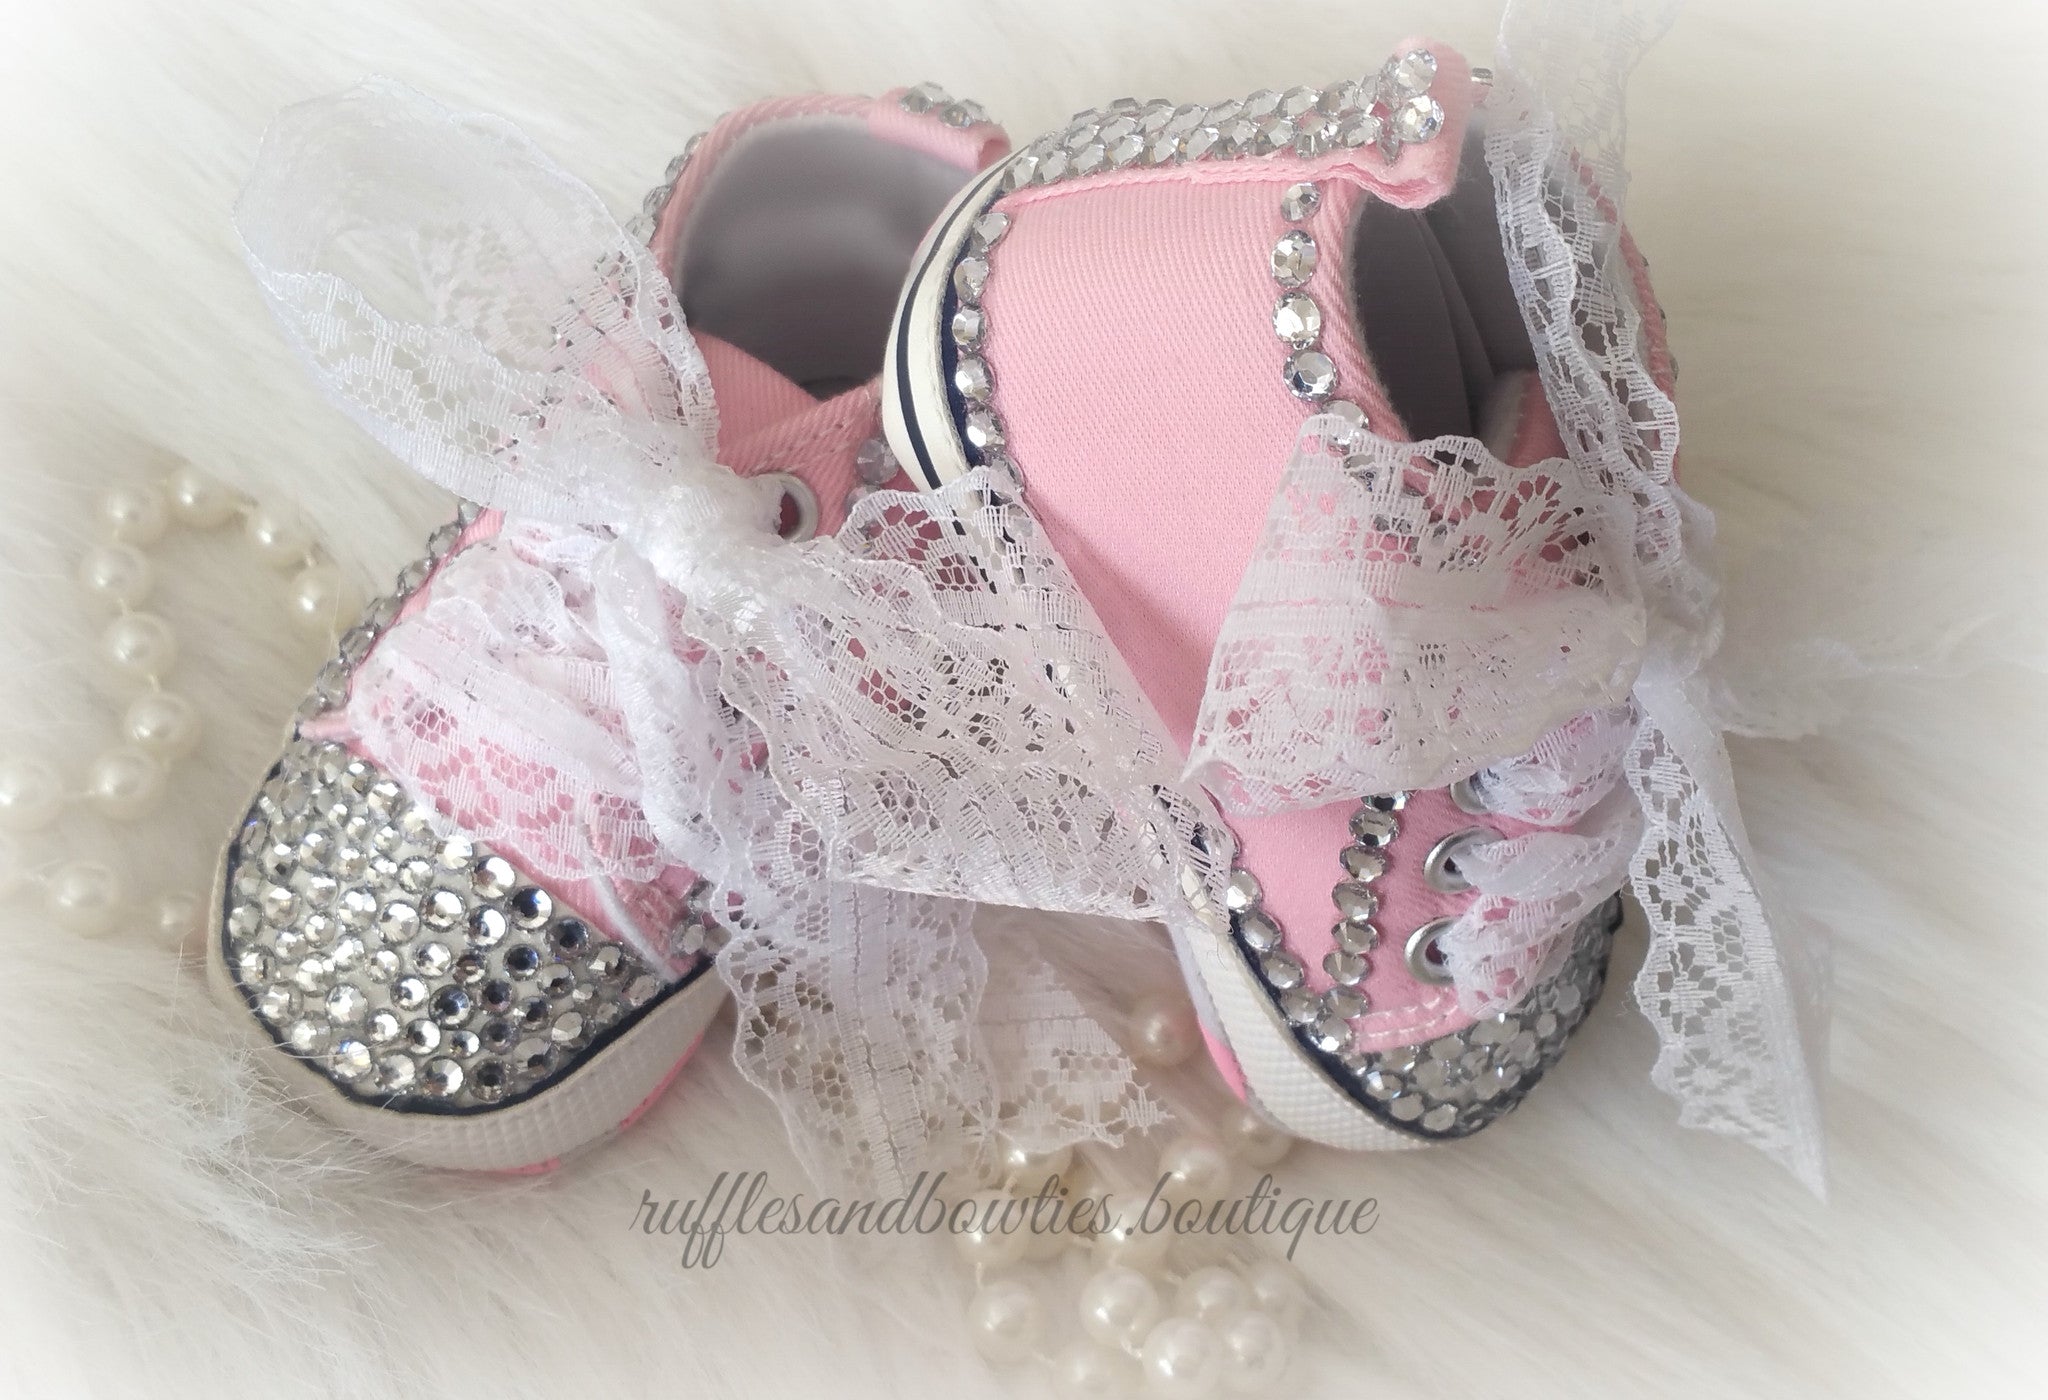 Baby Girl Crystal Converse Shoes - Pink High tops blinged out with Crystals and Lace for Ribbons